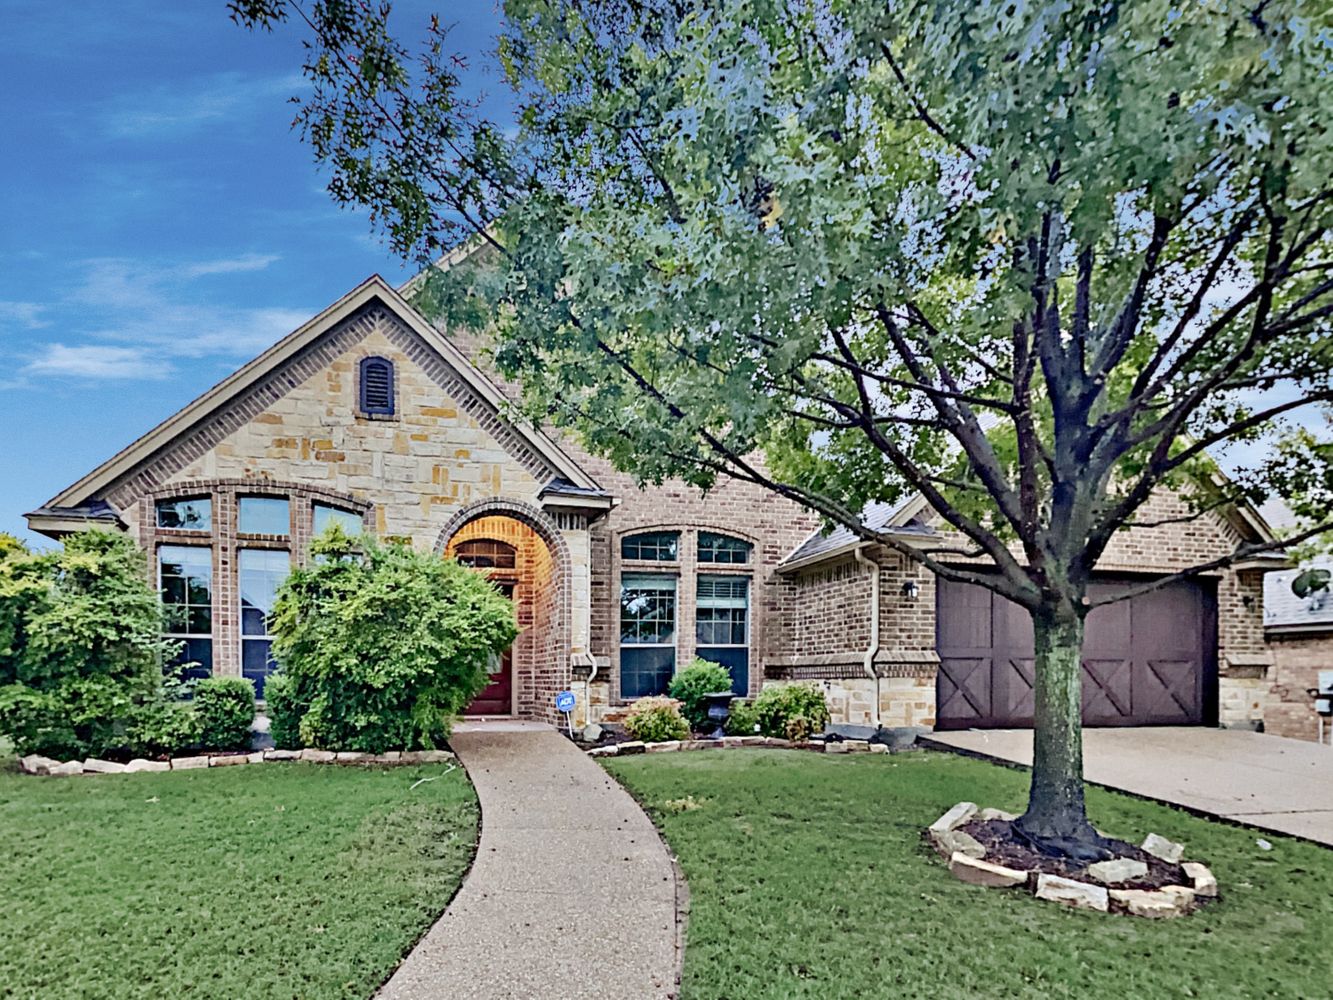 Charming home with a long walkway and two-car garage at Invitation Homes Houston.